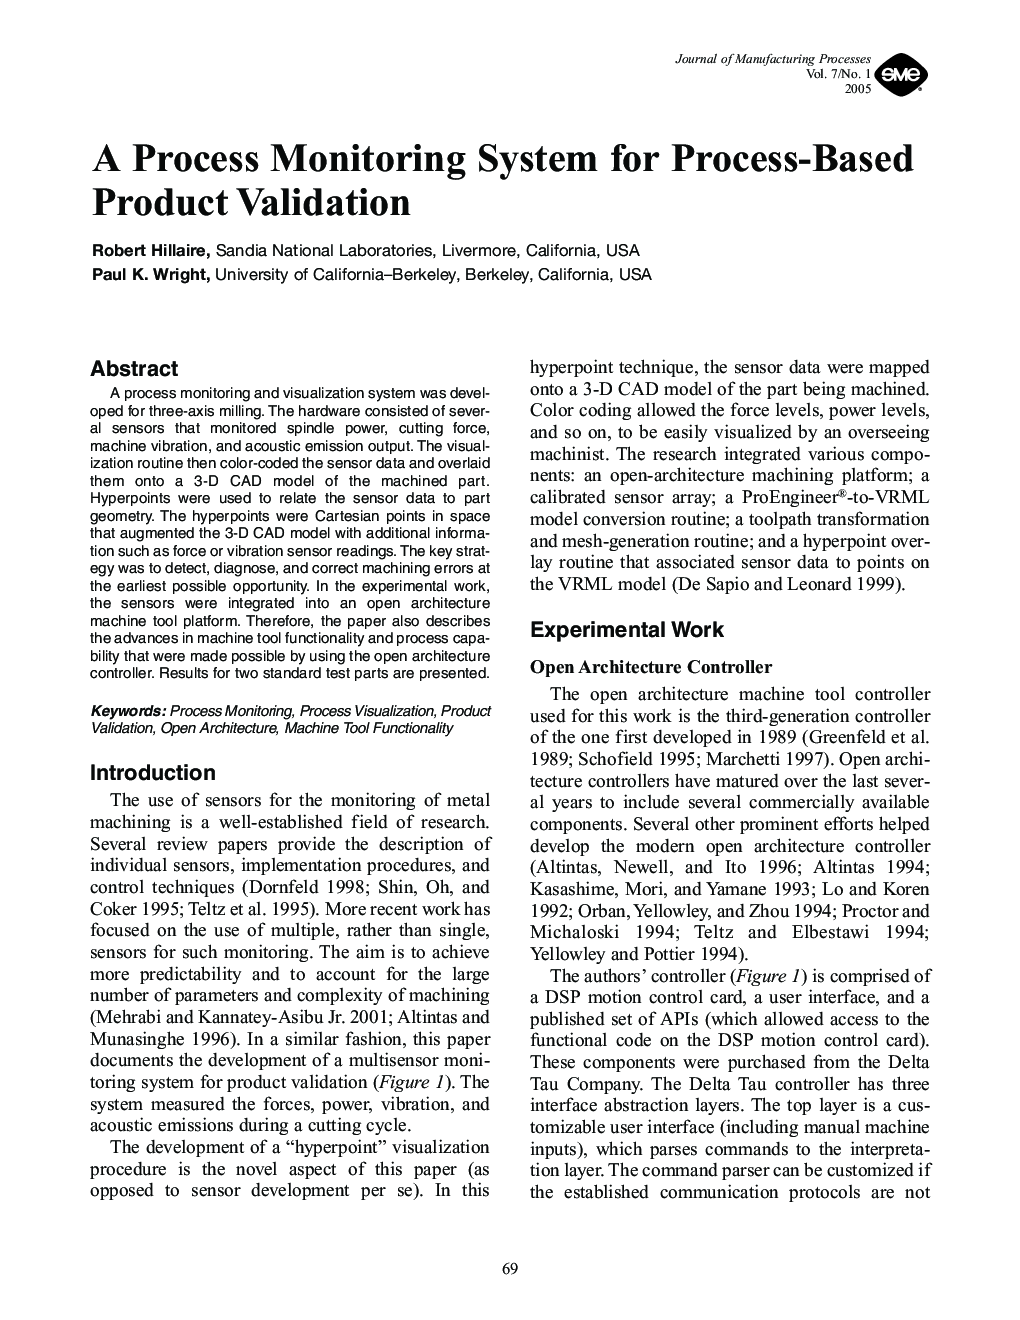 A Process Monitoring System for Process-Based Product Validation